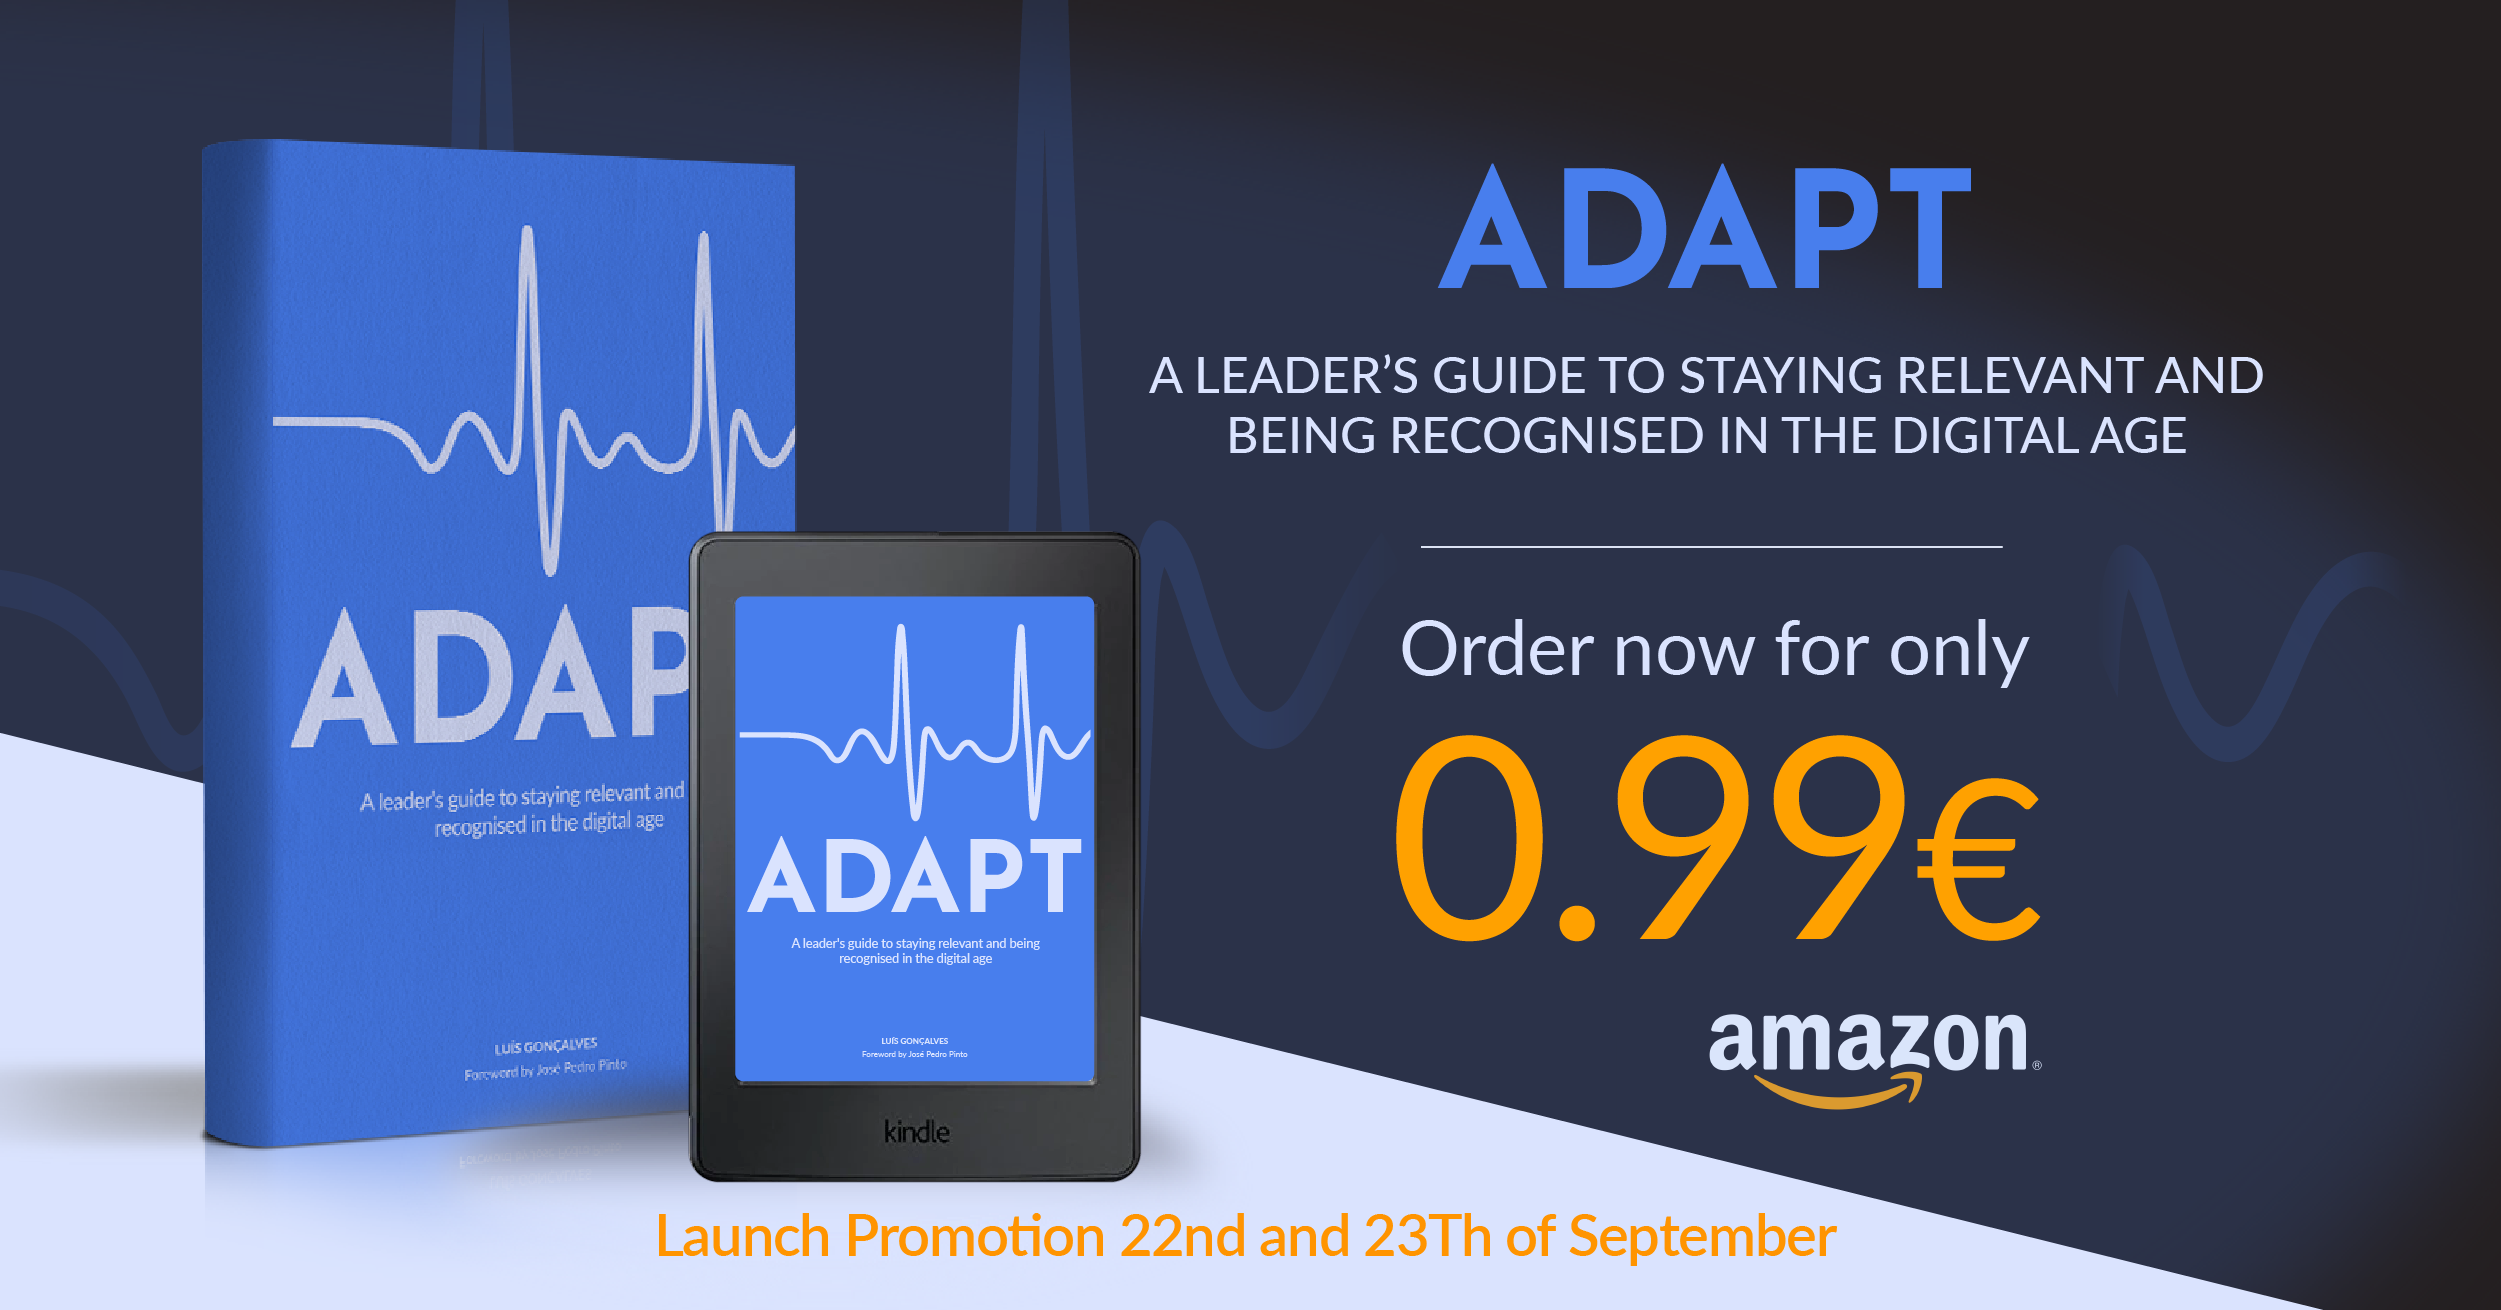 Introducing ADAPT, a book for digital transformation